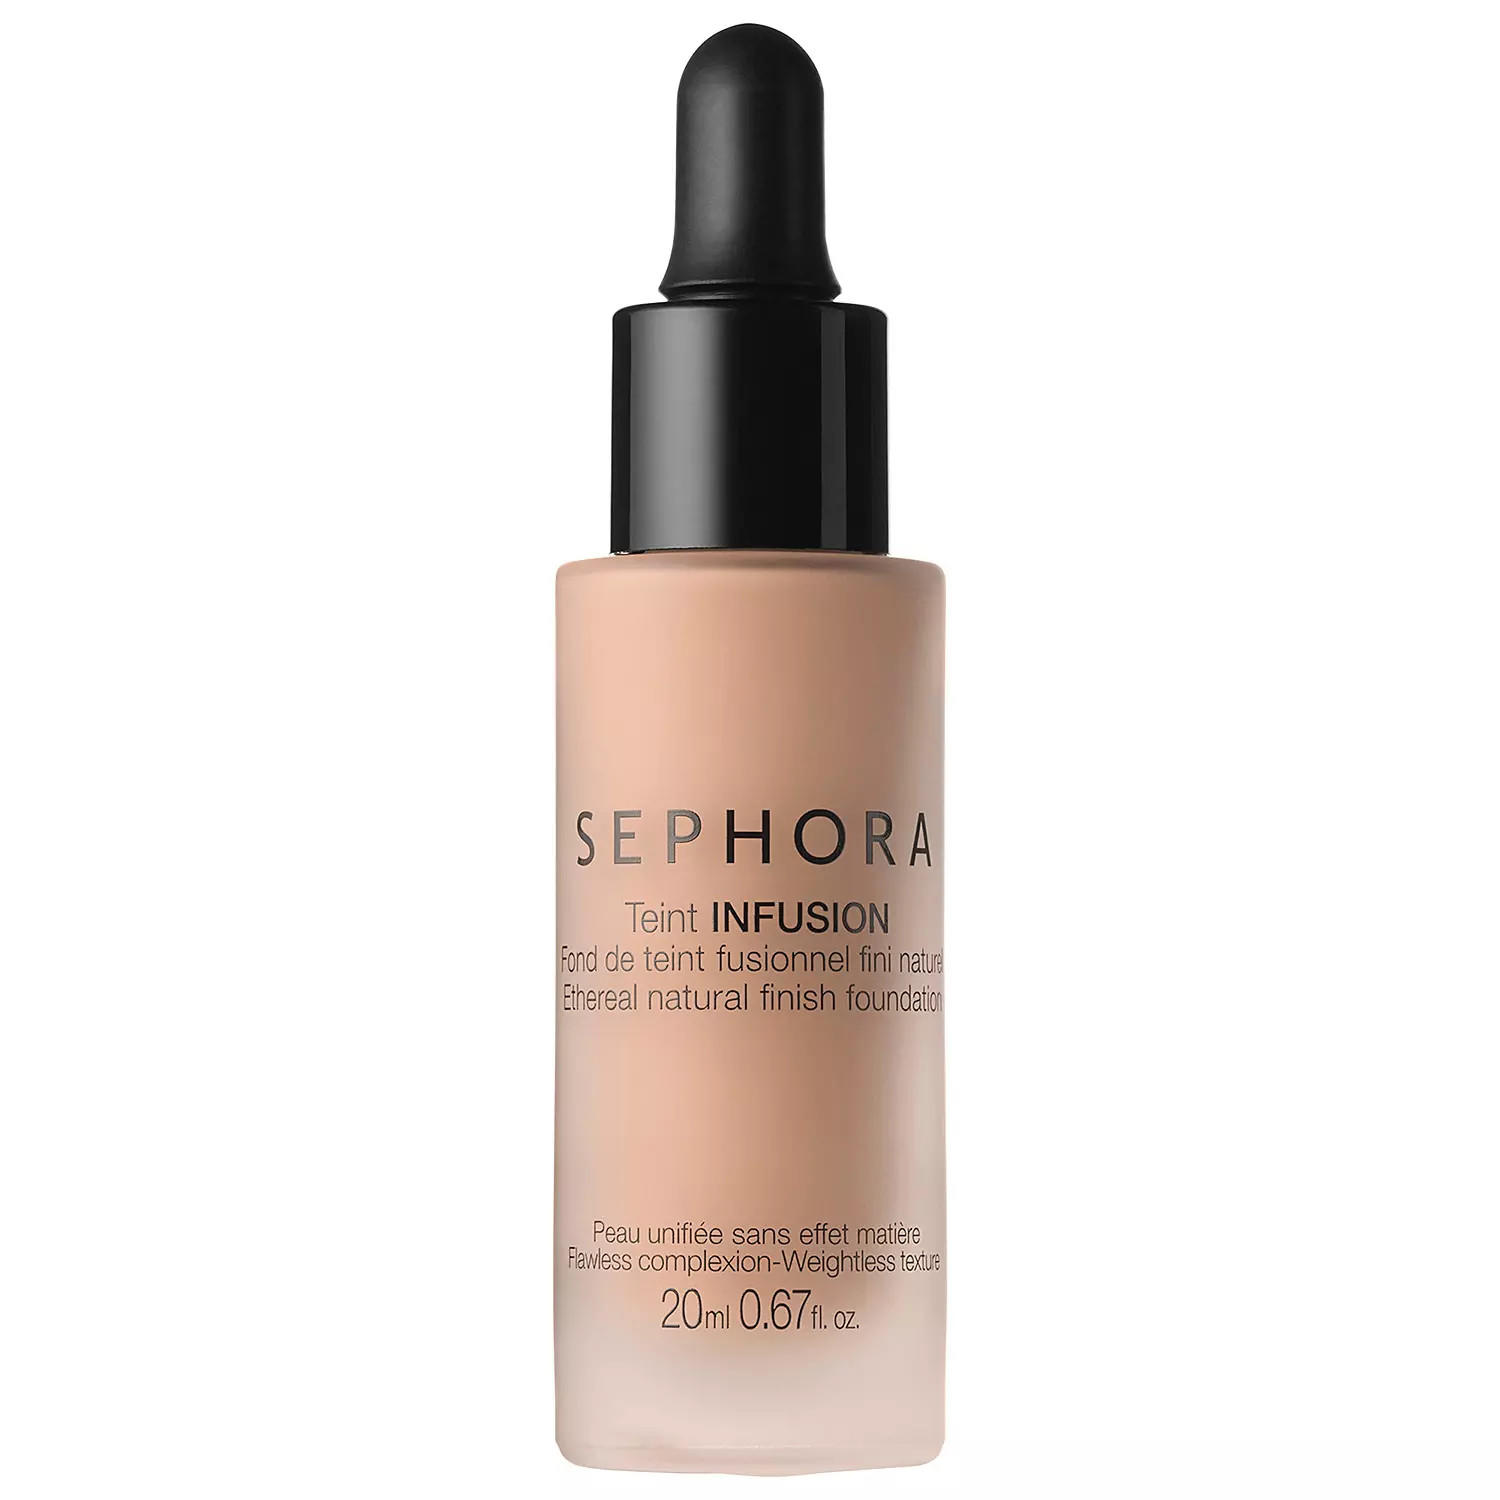 Sephora Teint Infusion Ethereal Natural Finish Foundation Cream 20